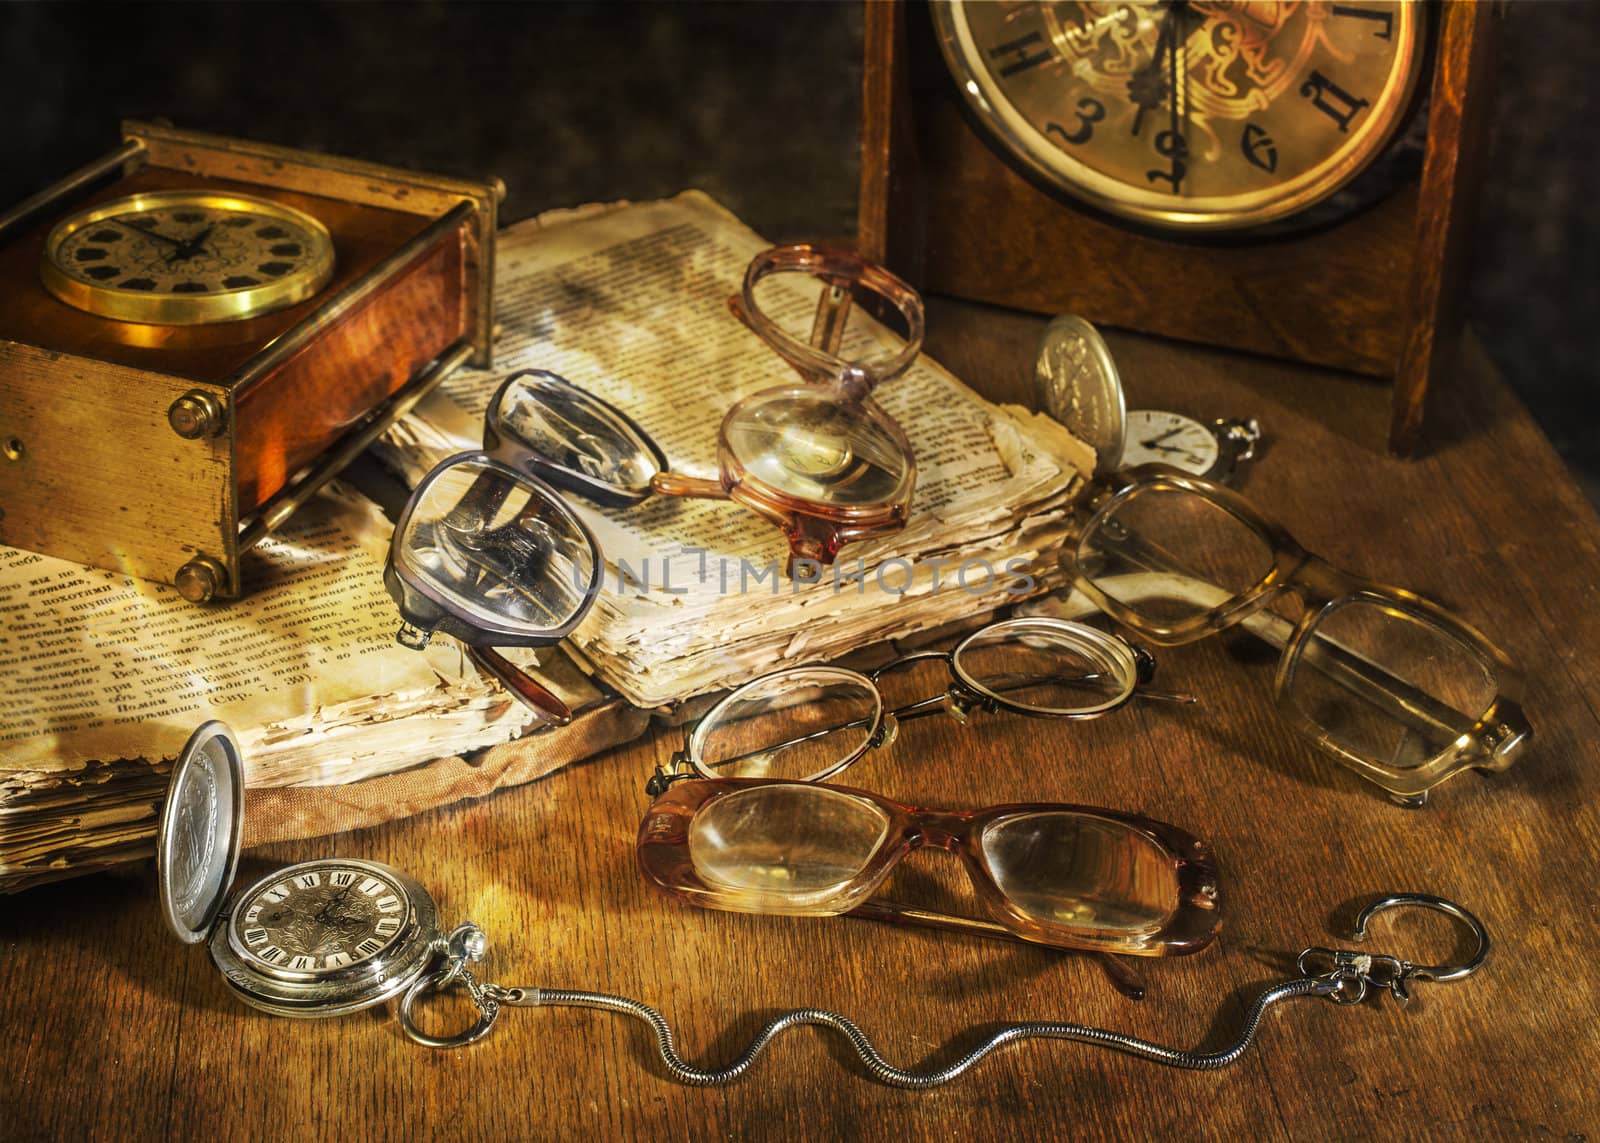 many Glasses and watch lying on a wooden table